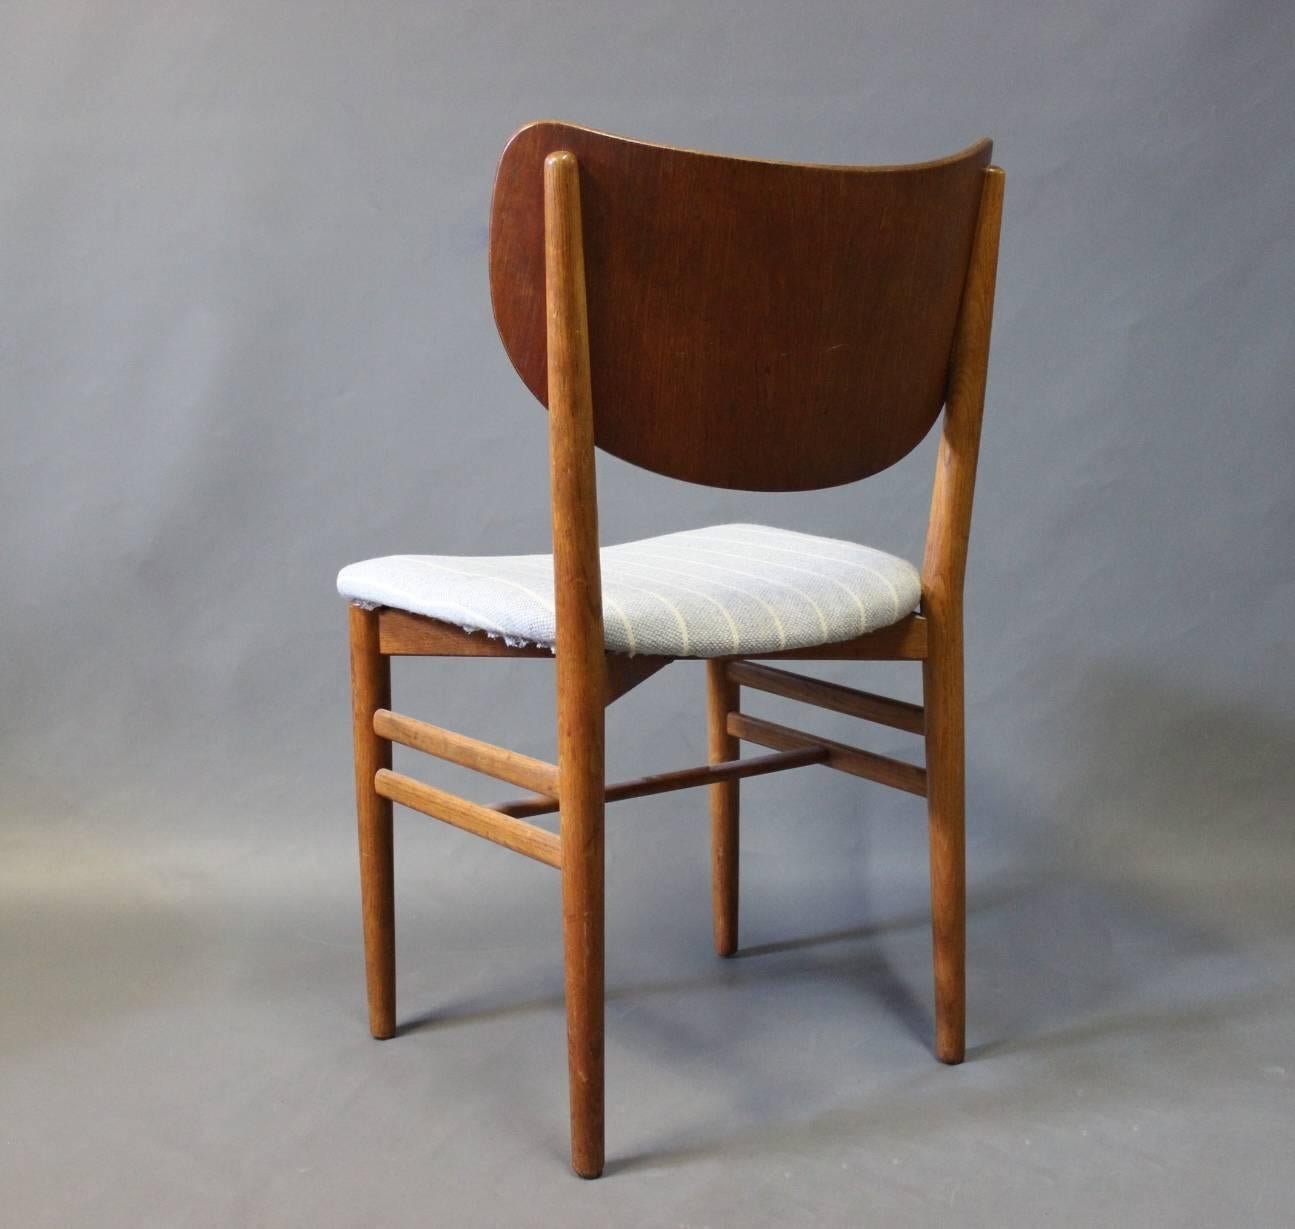 Danish Set of Four Dining Room Chairs Designed by Nils and Eva Koppel, 1960s